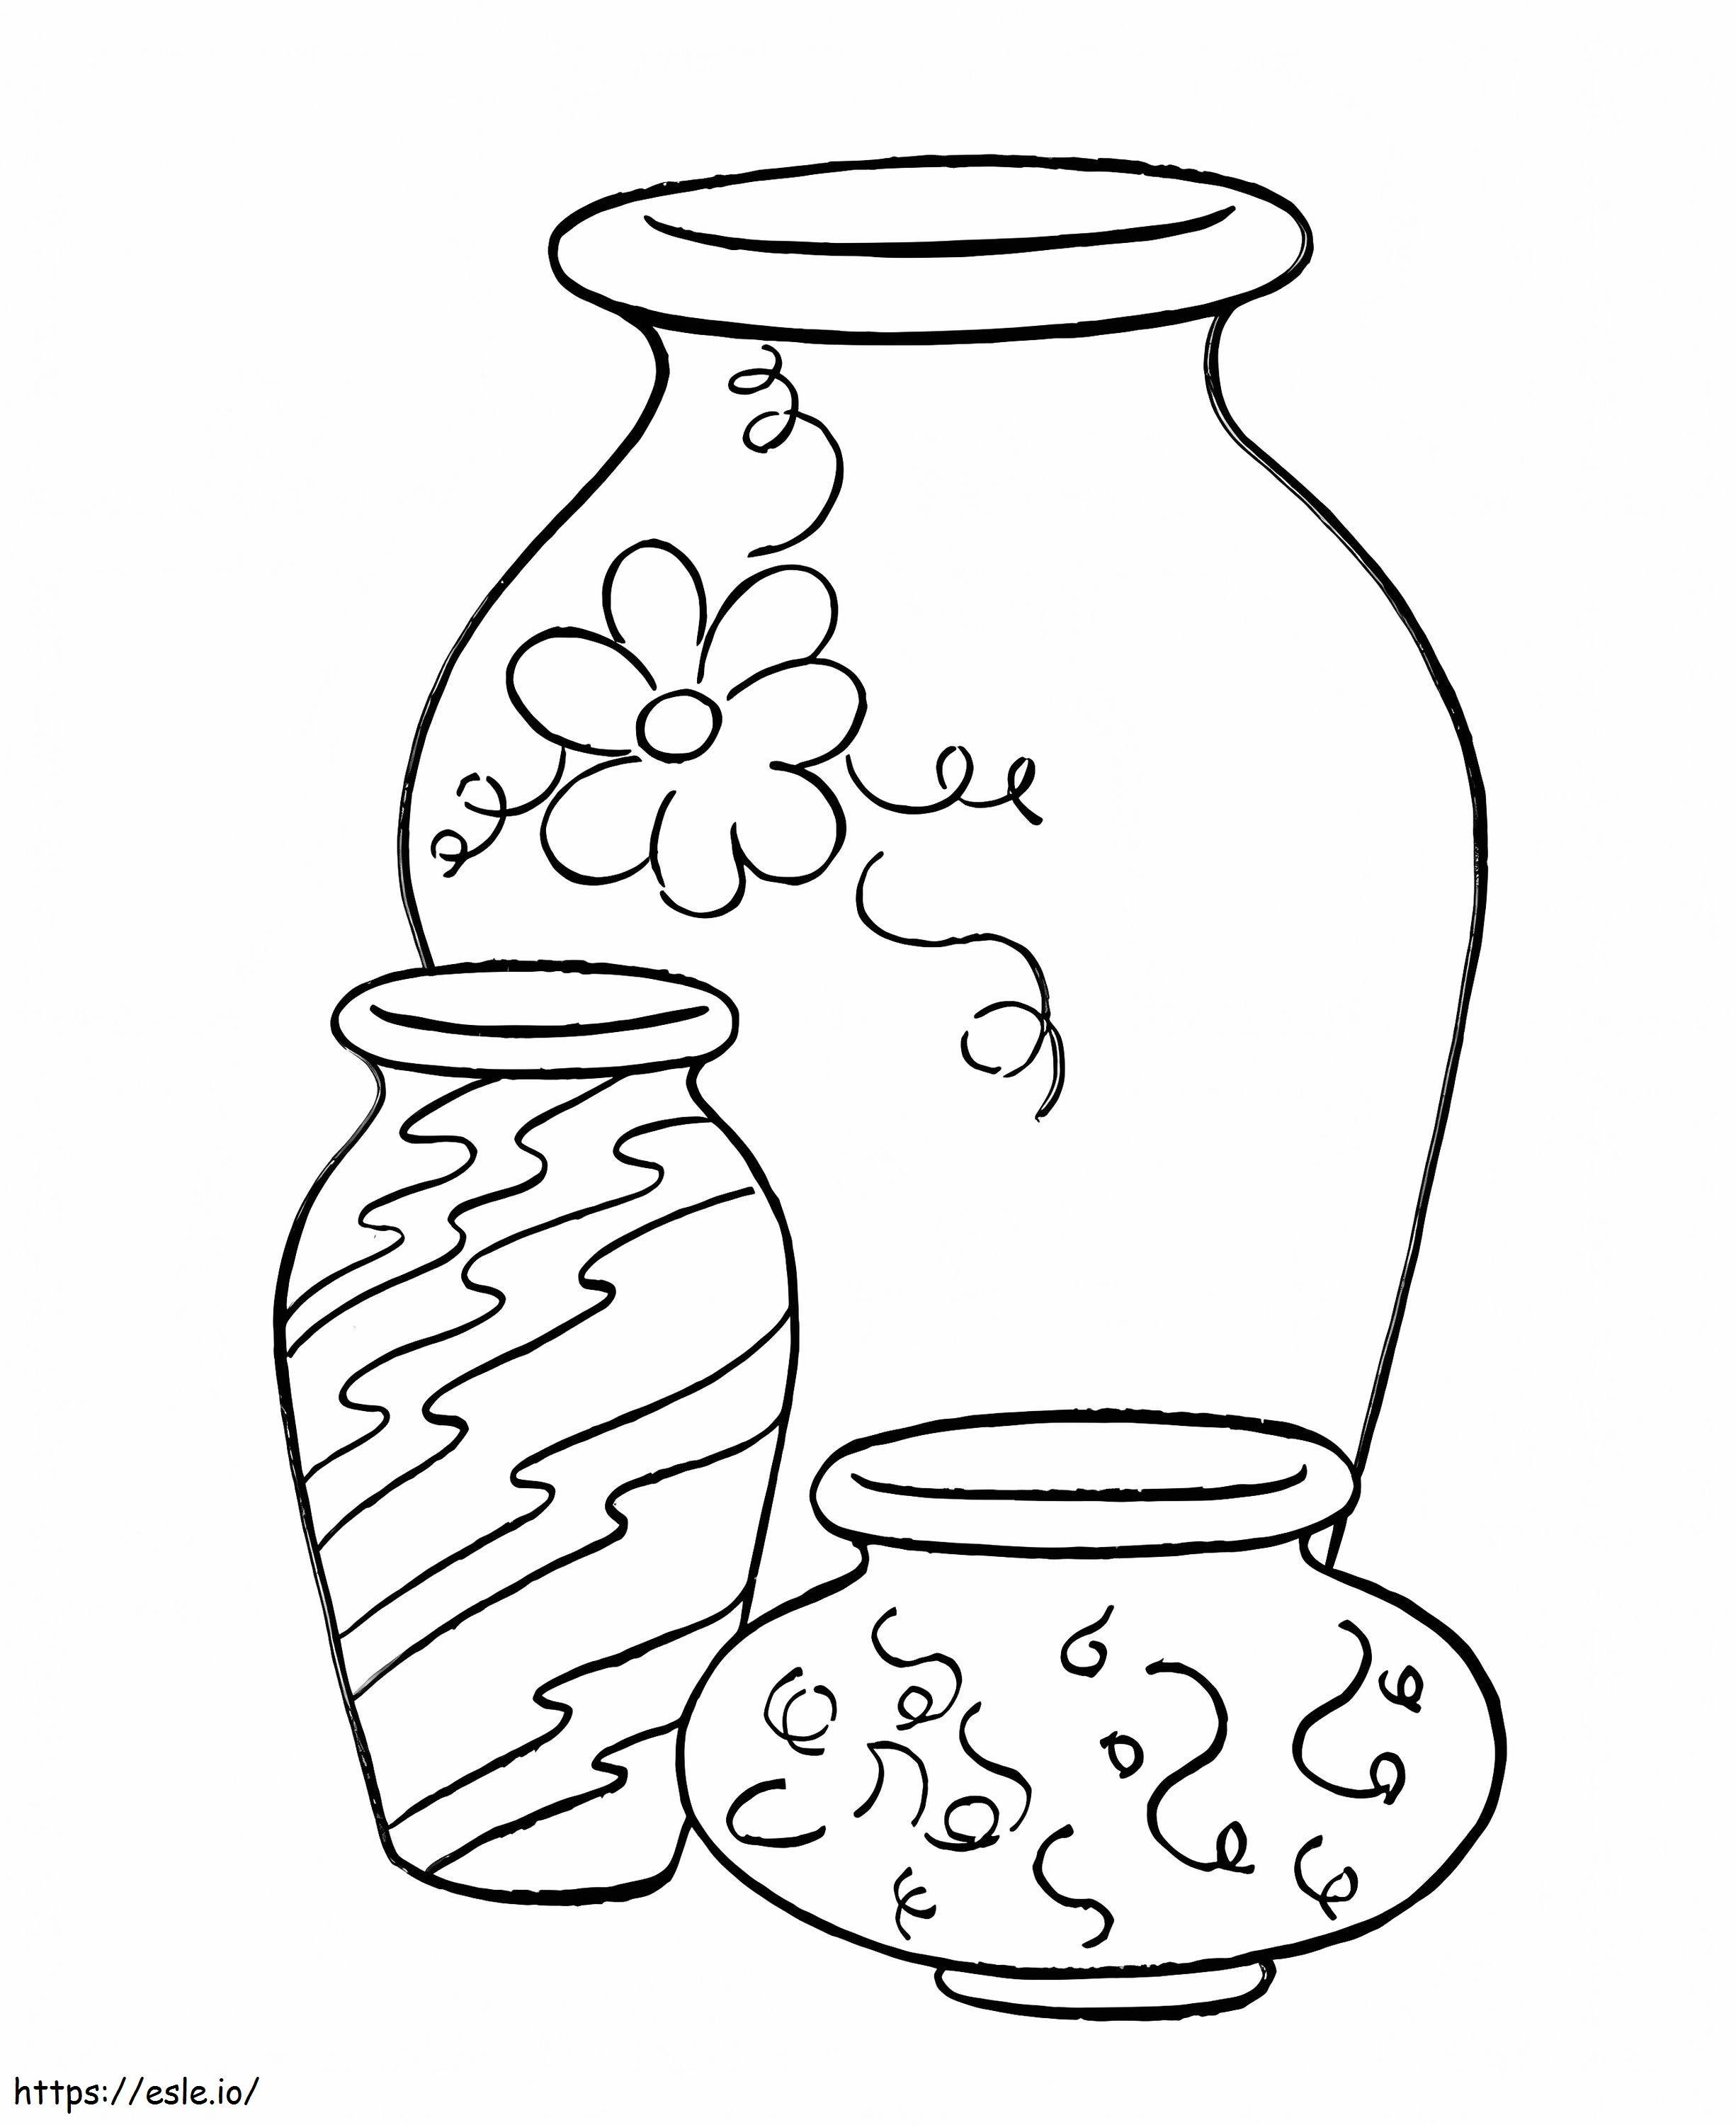 Three Vases coloring page